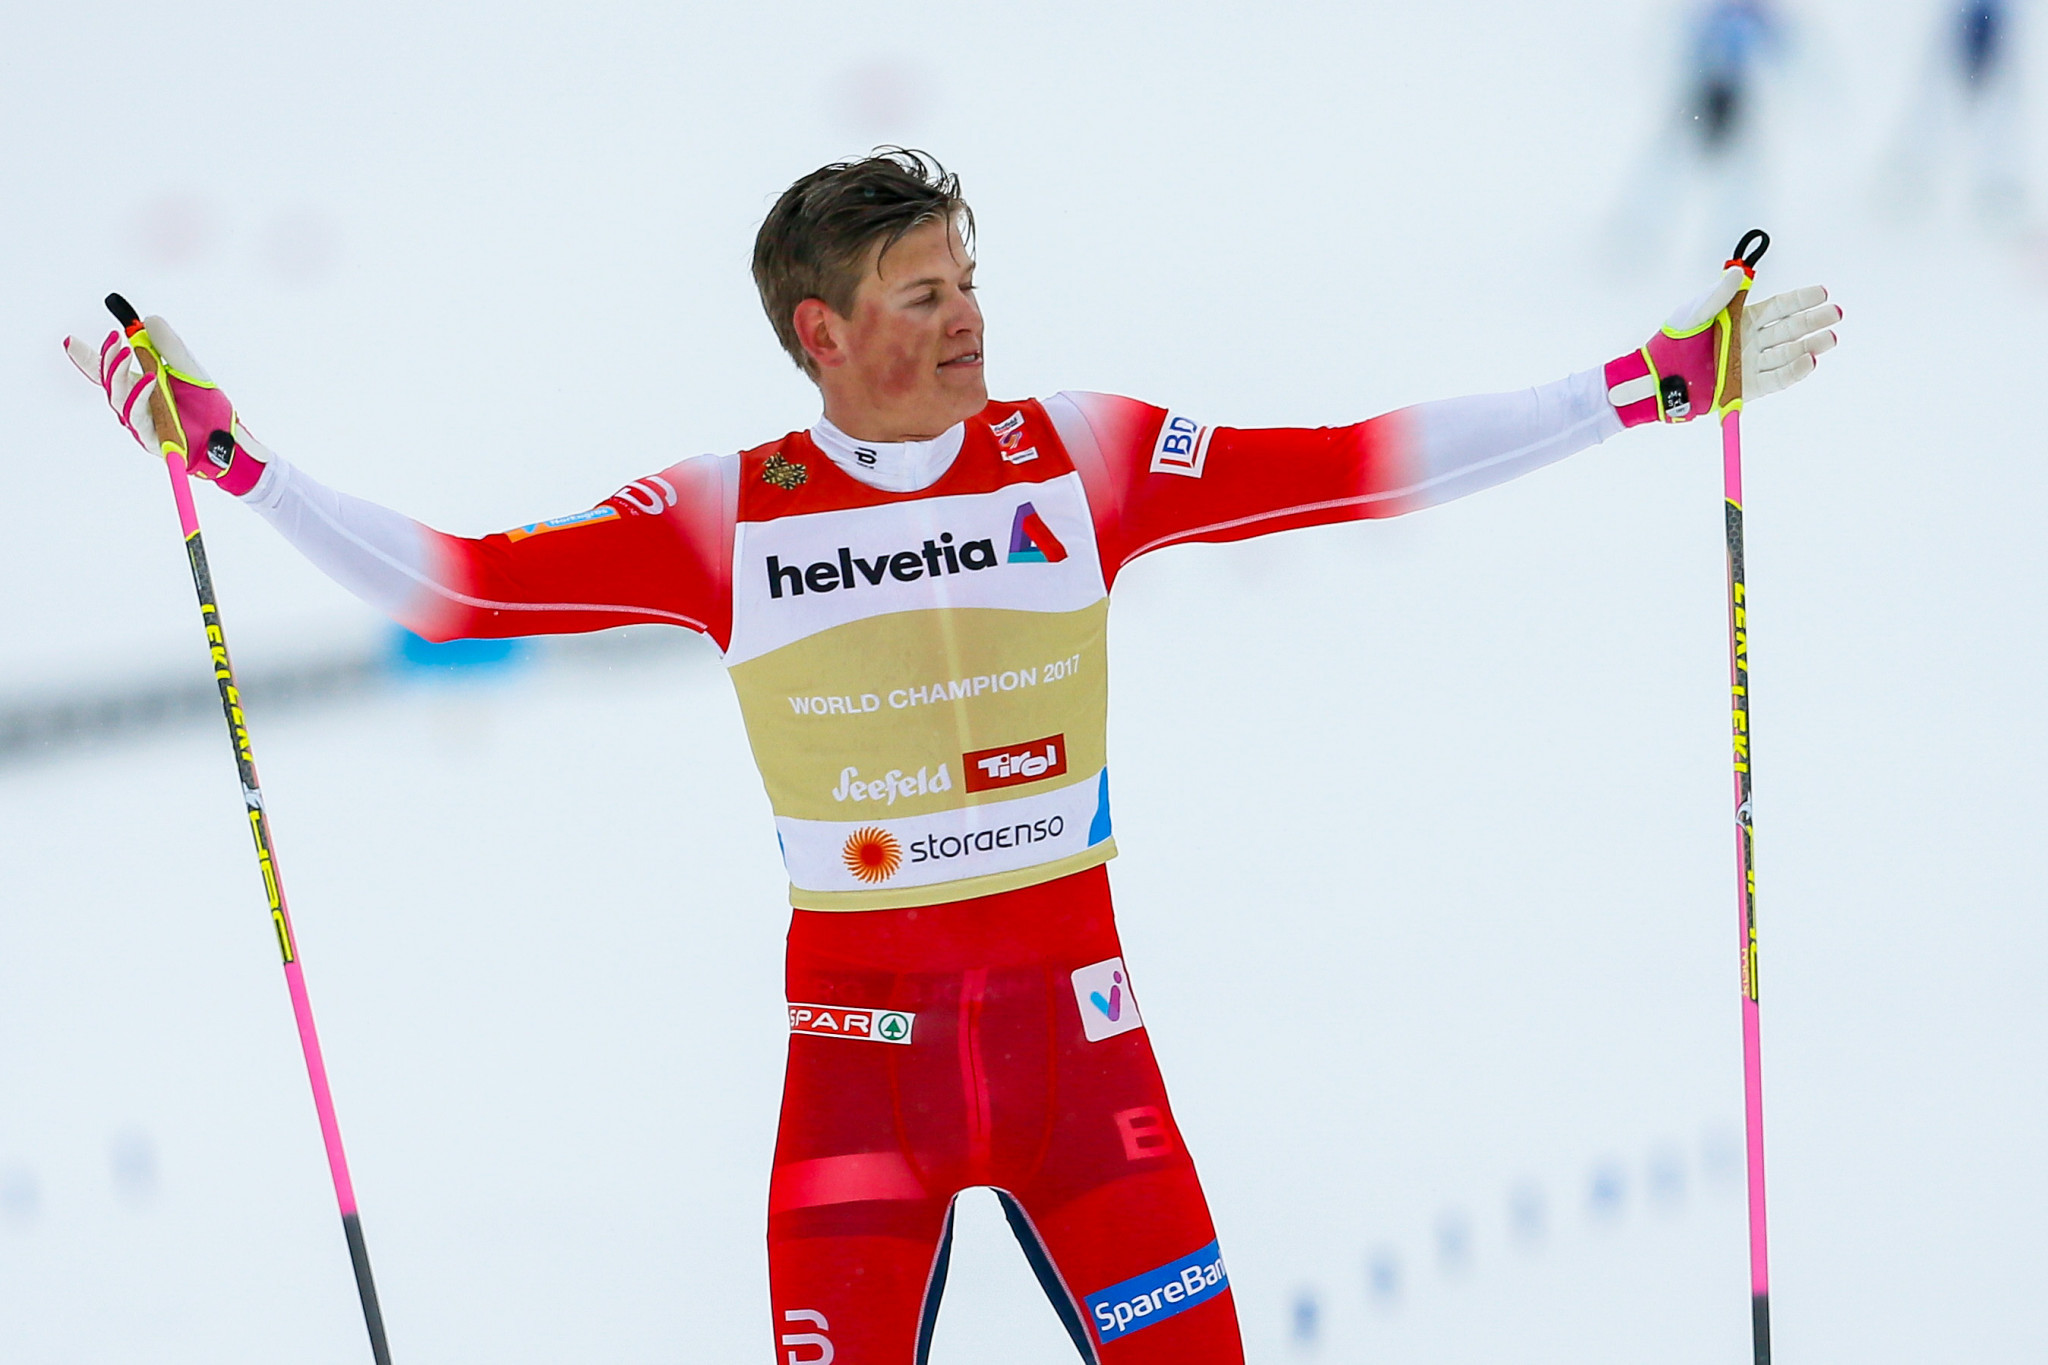 Norway's Johannes Høsflot Klæbo will be vying for success in the men's sprint and 15km events ©Getty Images